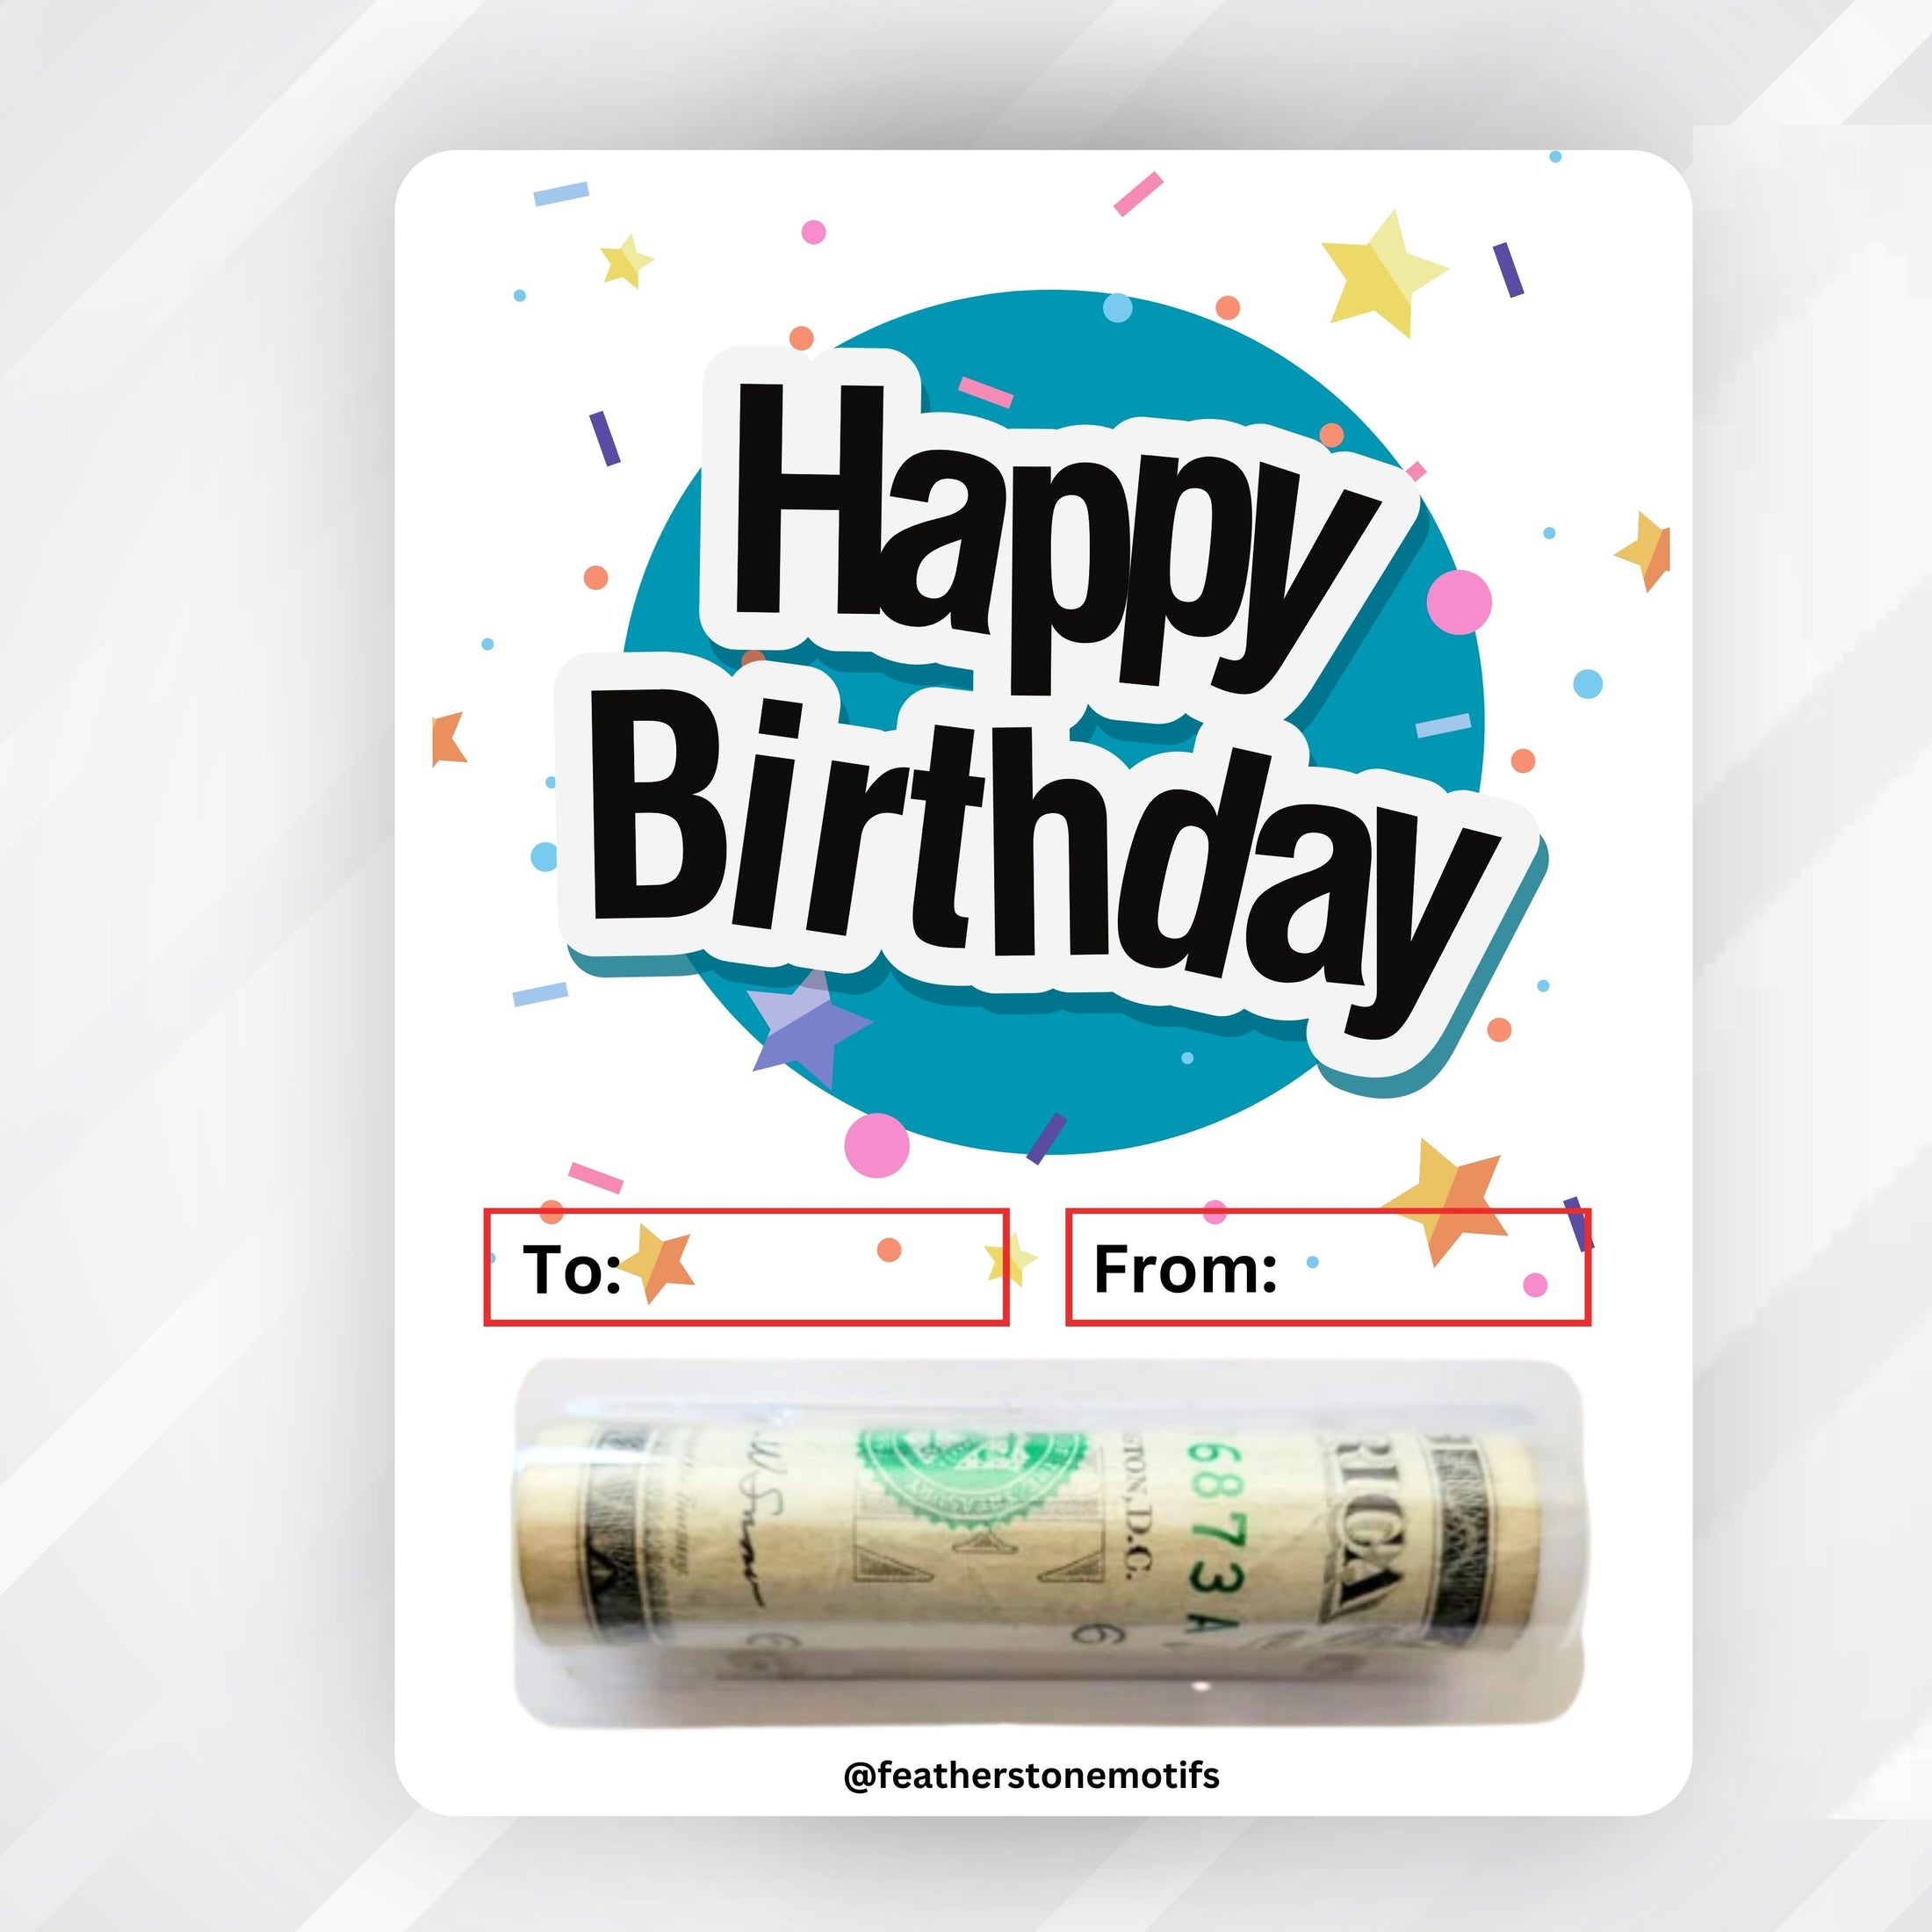 This image shows the money tube attached to the Blue Happy Birthday Money Card.